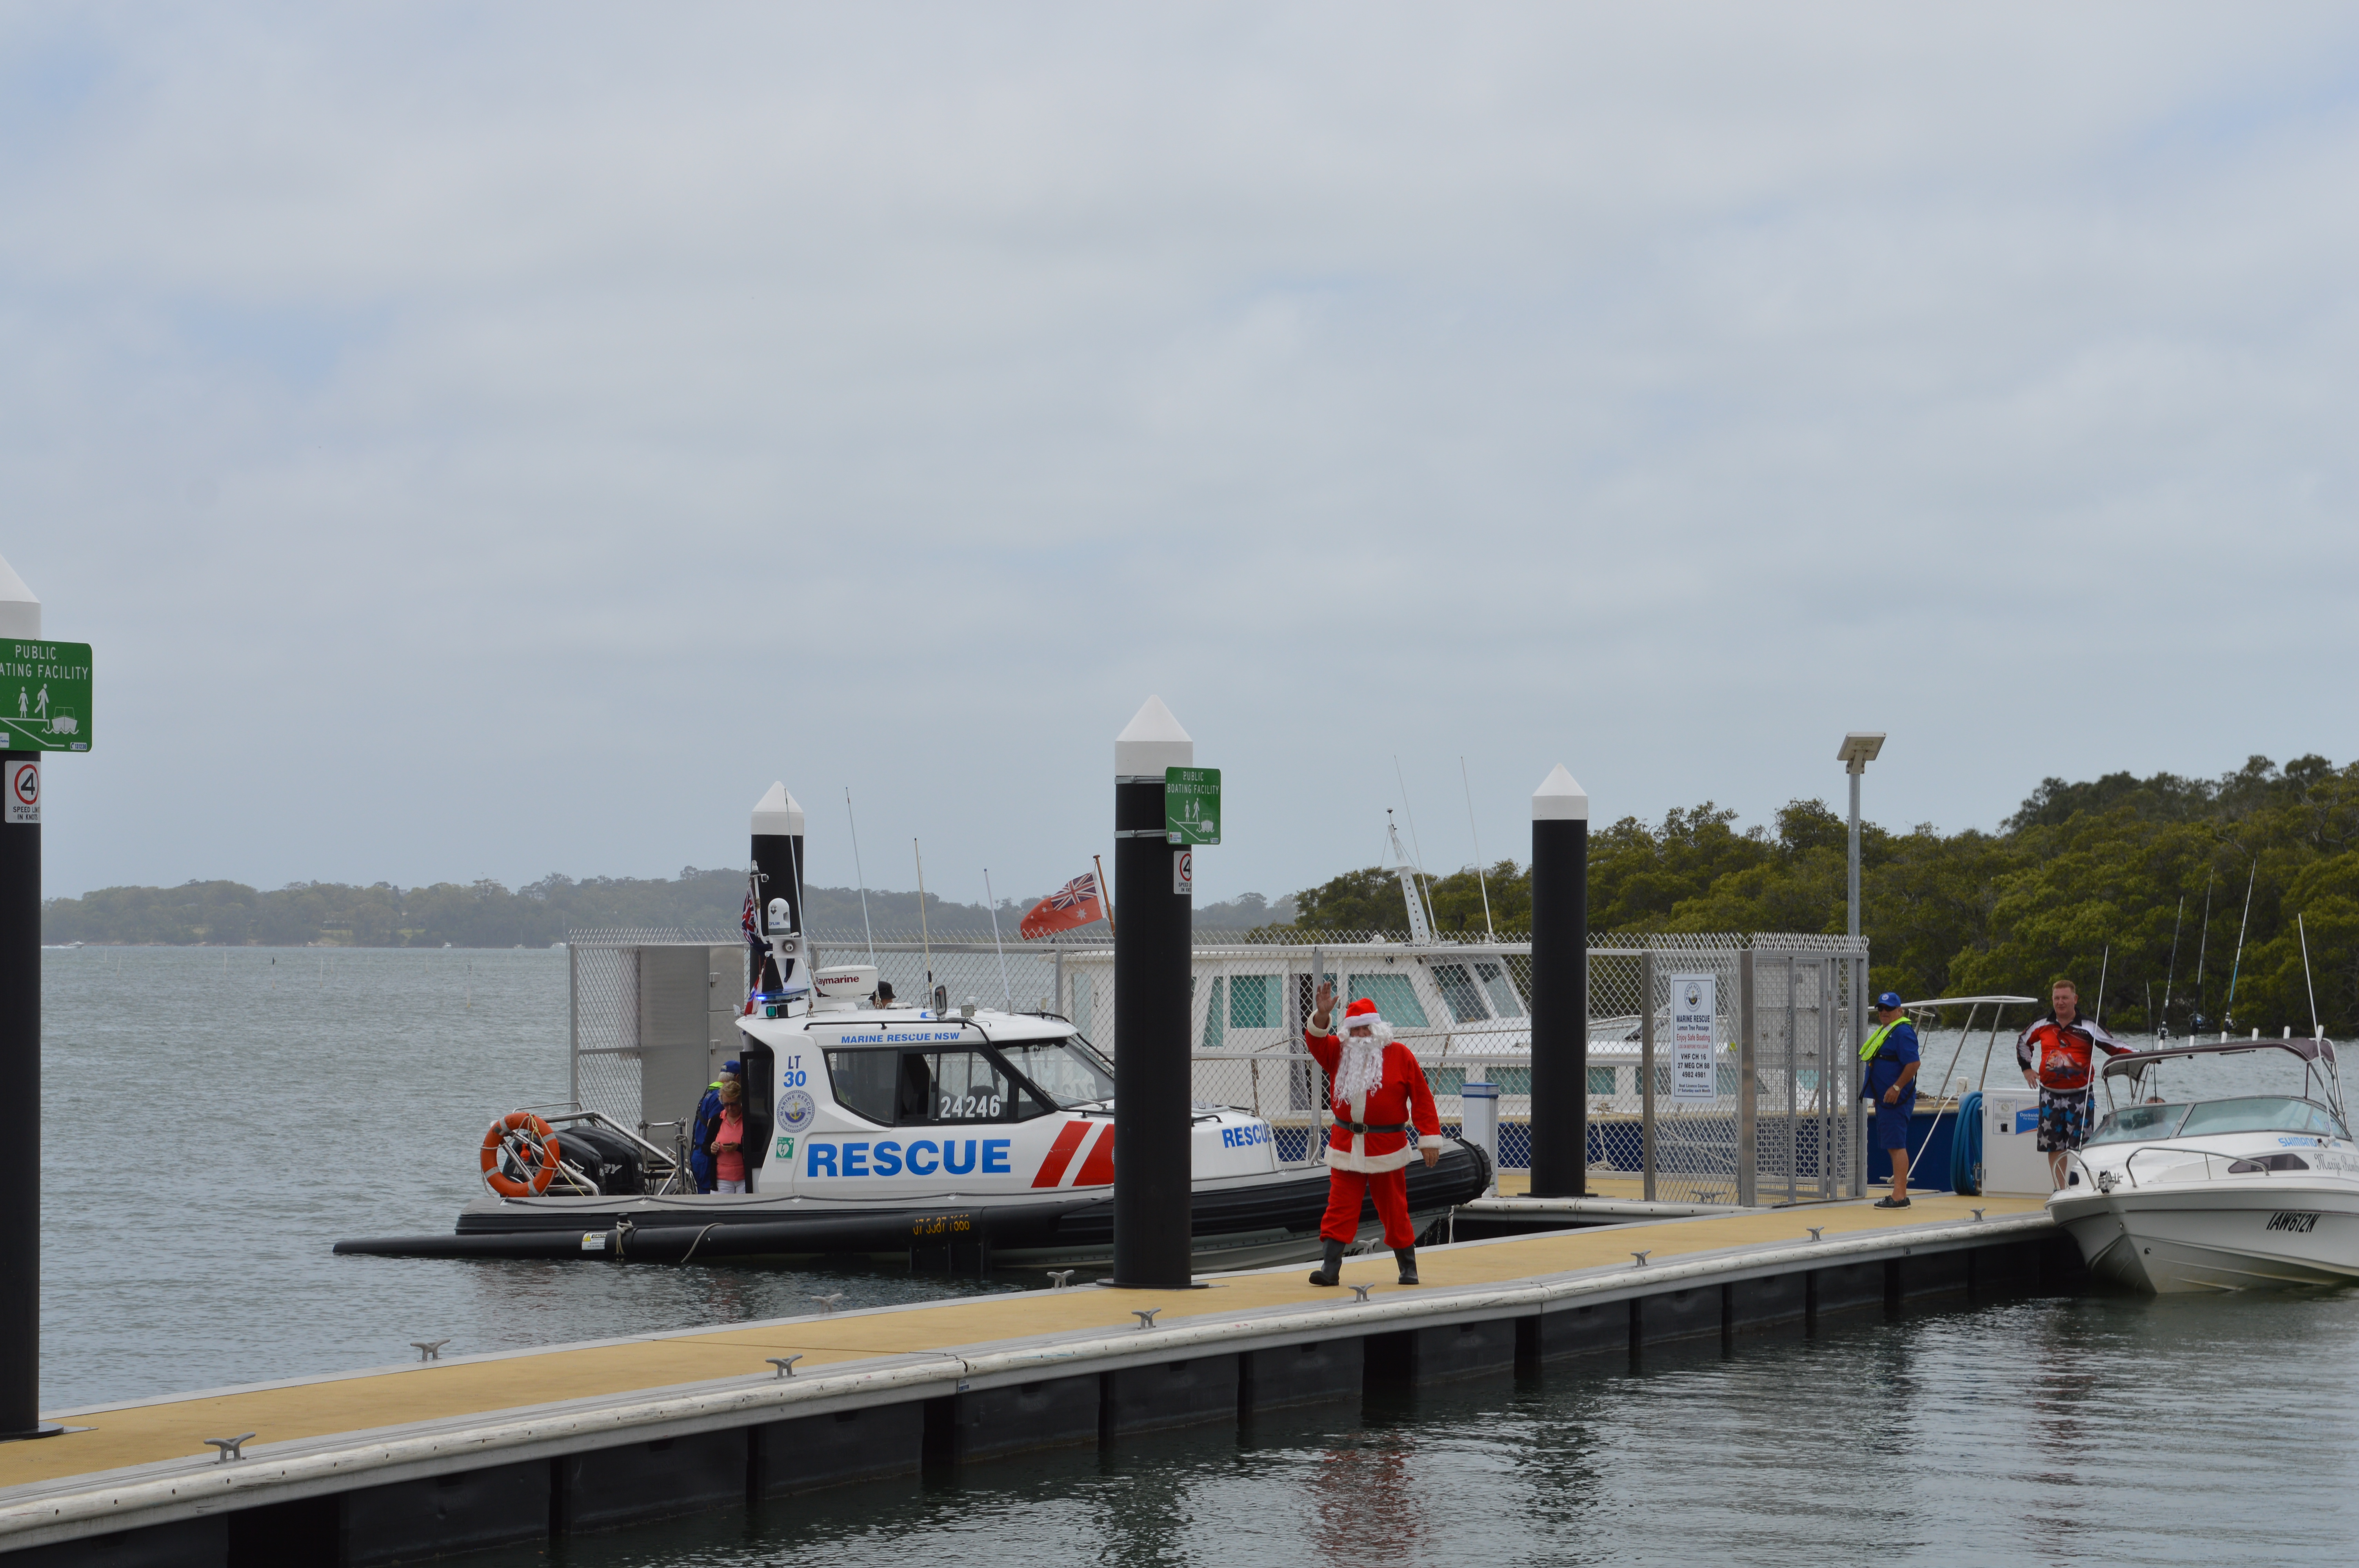 Santa made a special arrival on the Marine Rescue NSW boat.